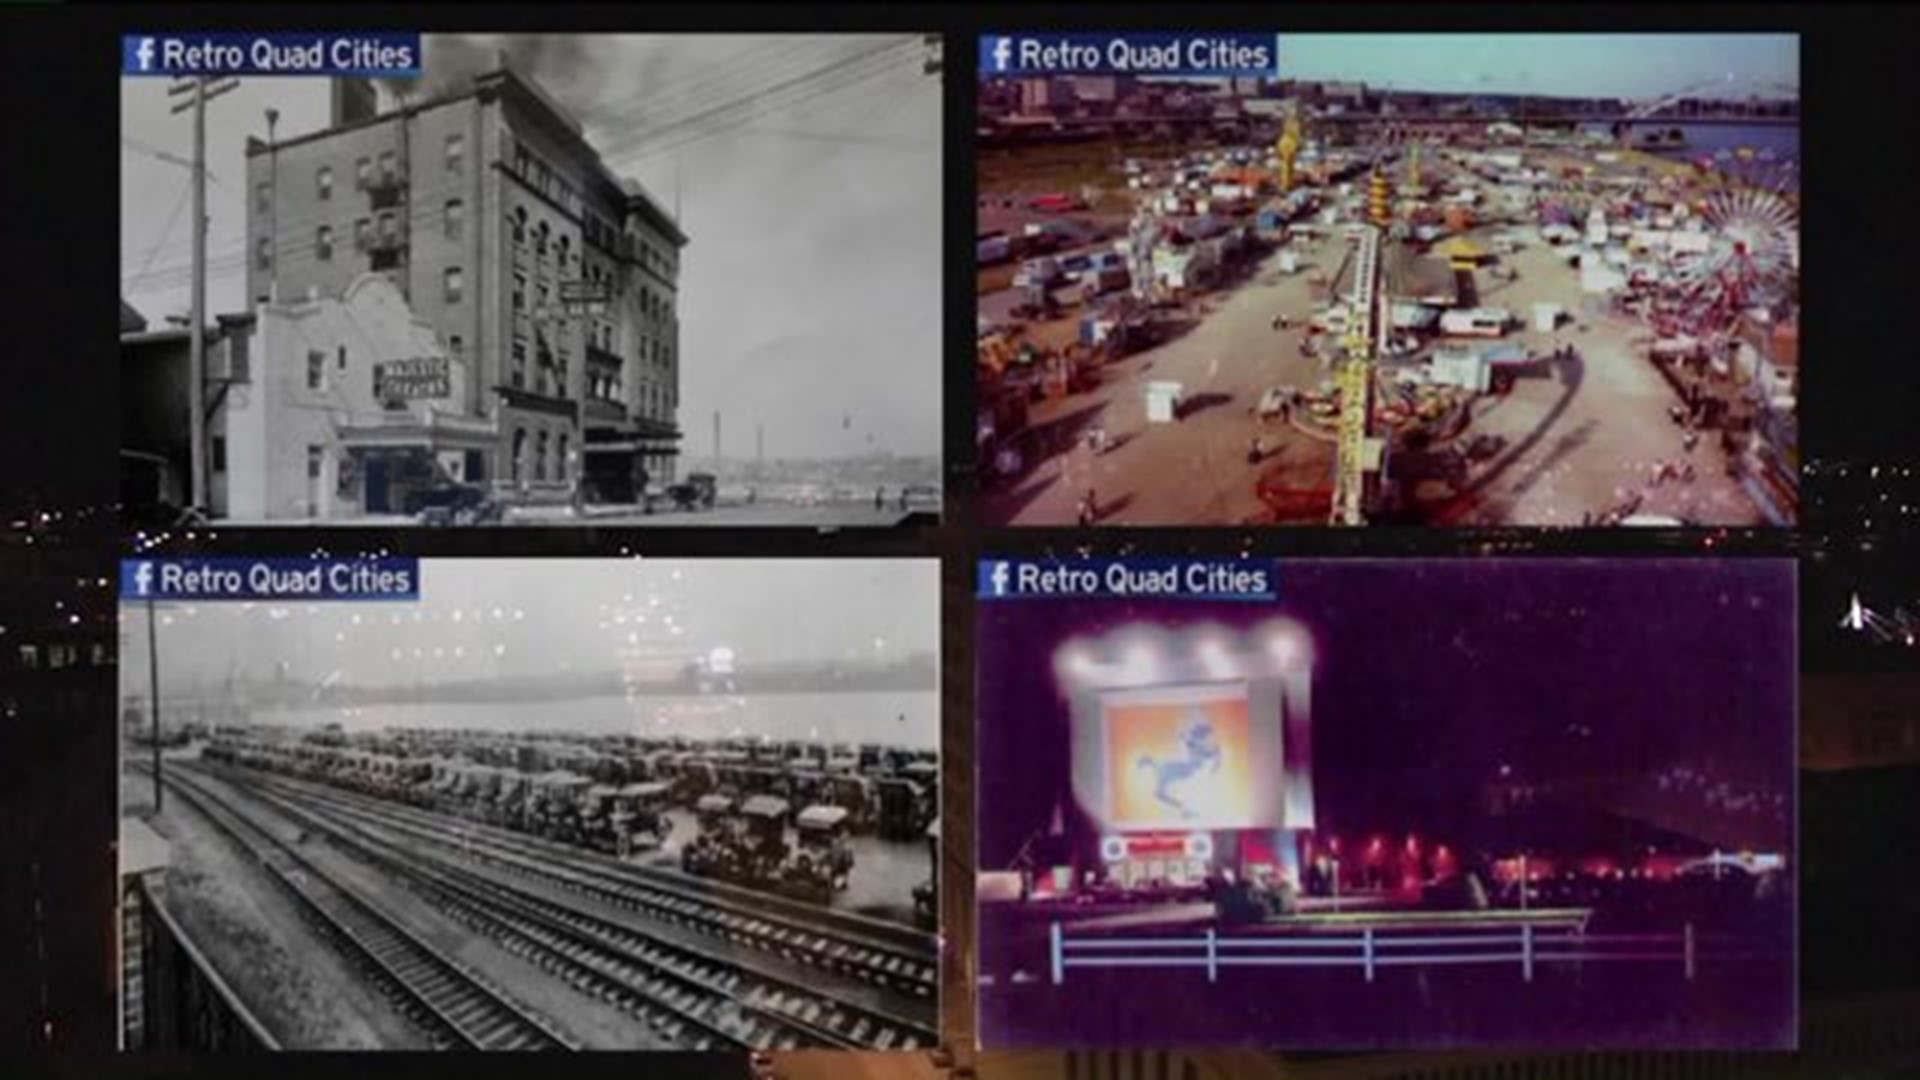 Taking a trip down memory lane with "Retro Quad Cities"